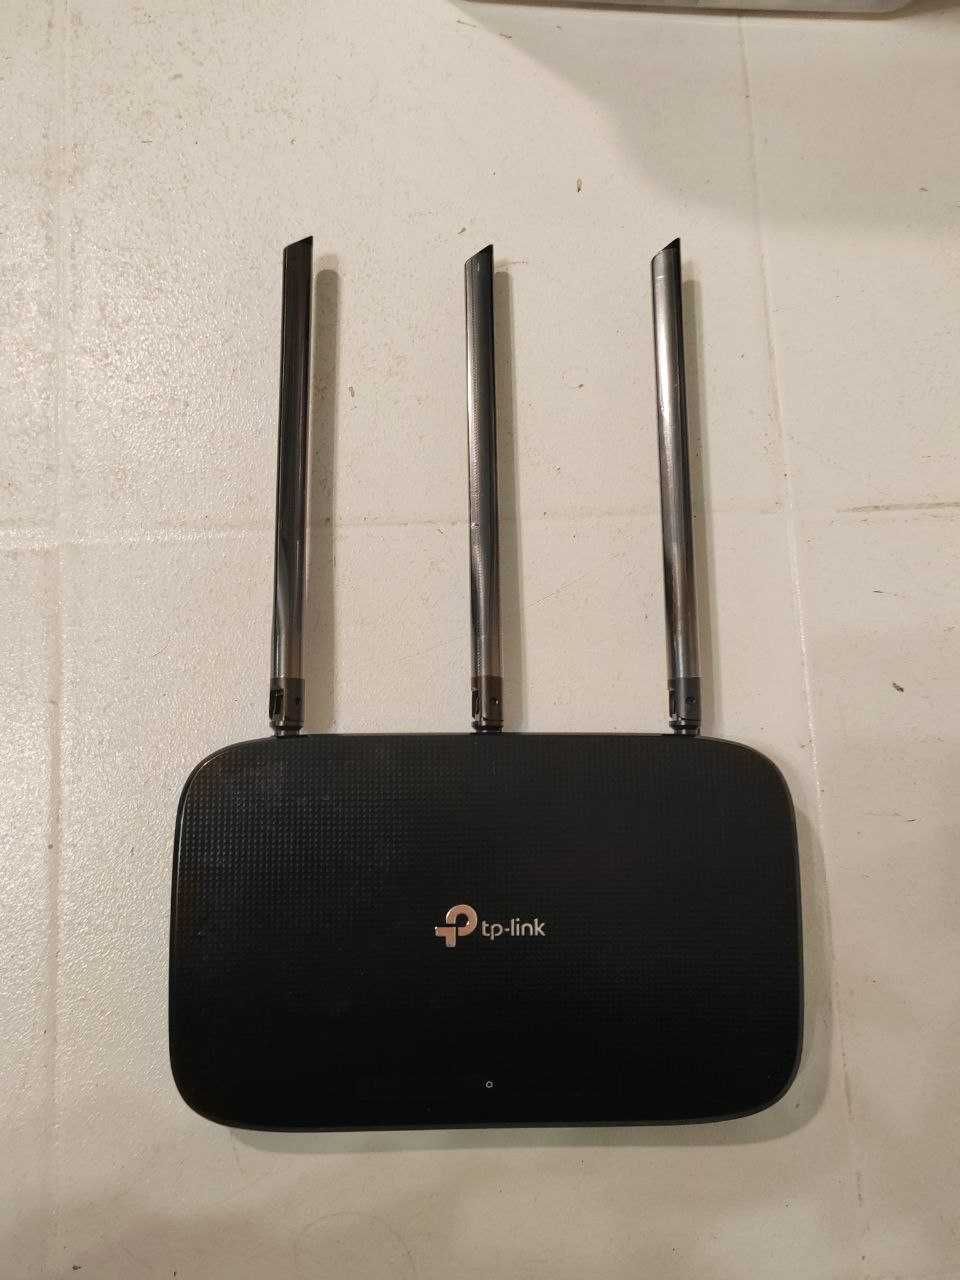 Маршрутизатор TP-Link TL-WR940N